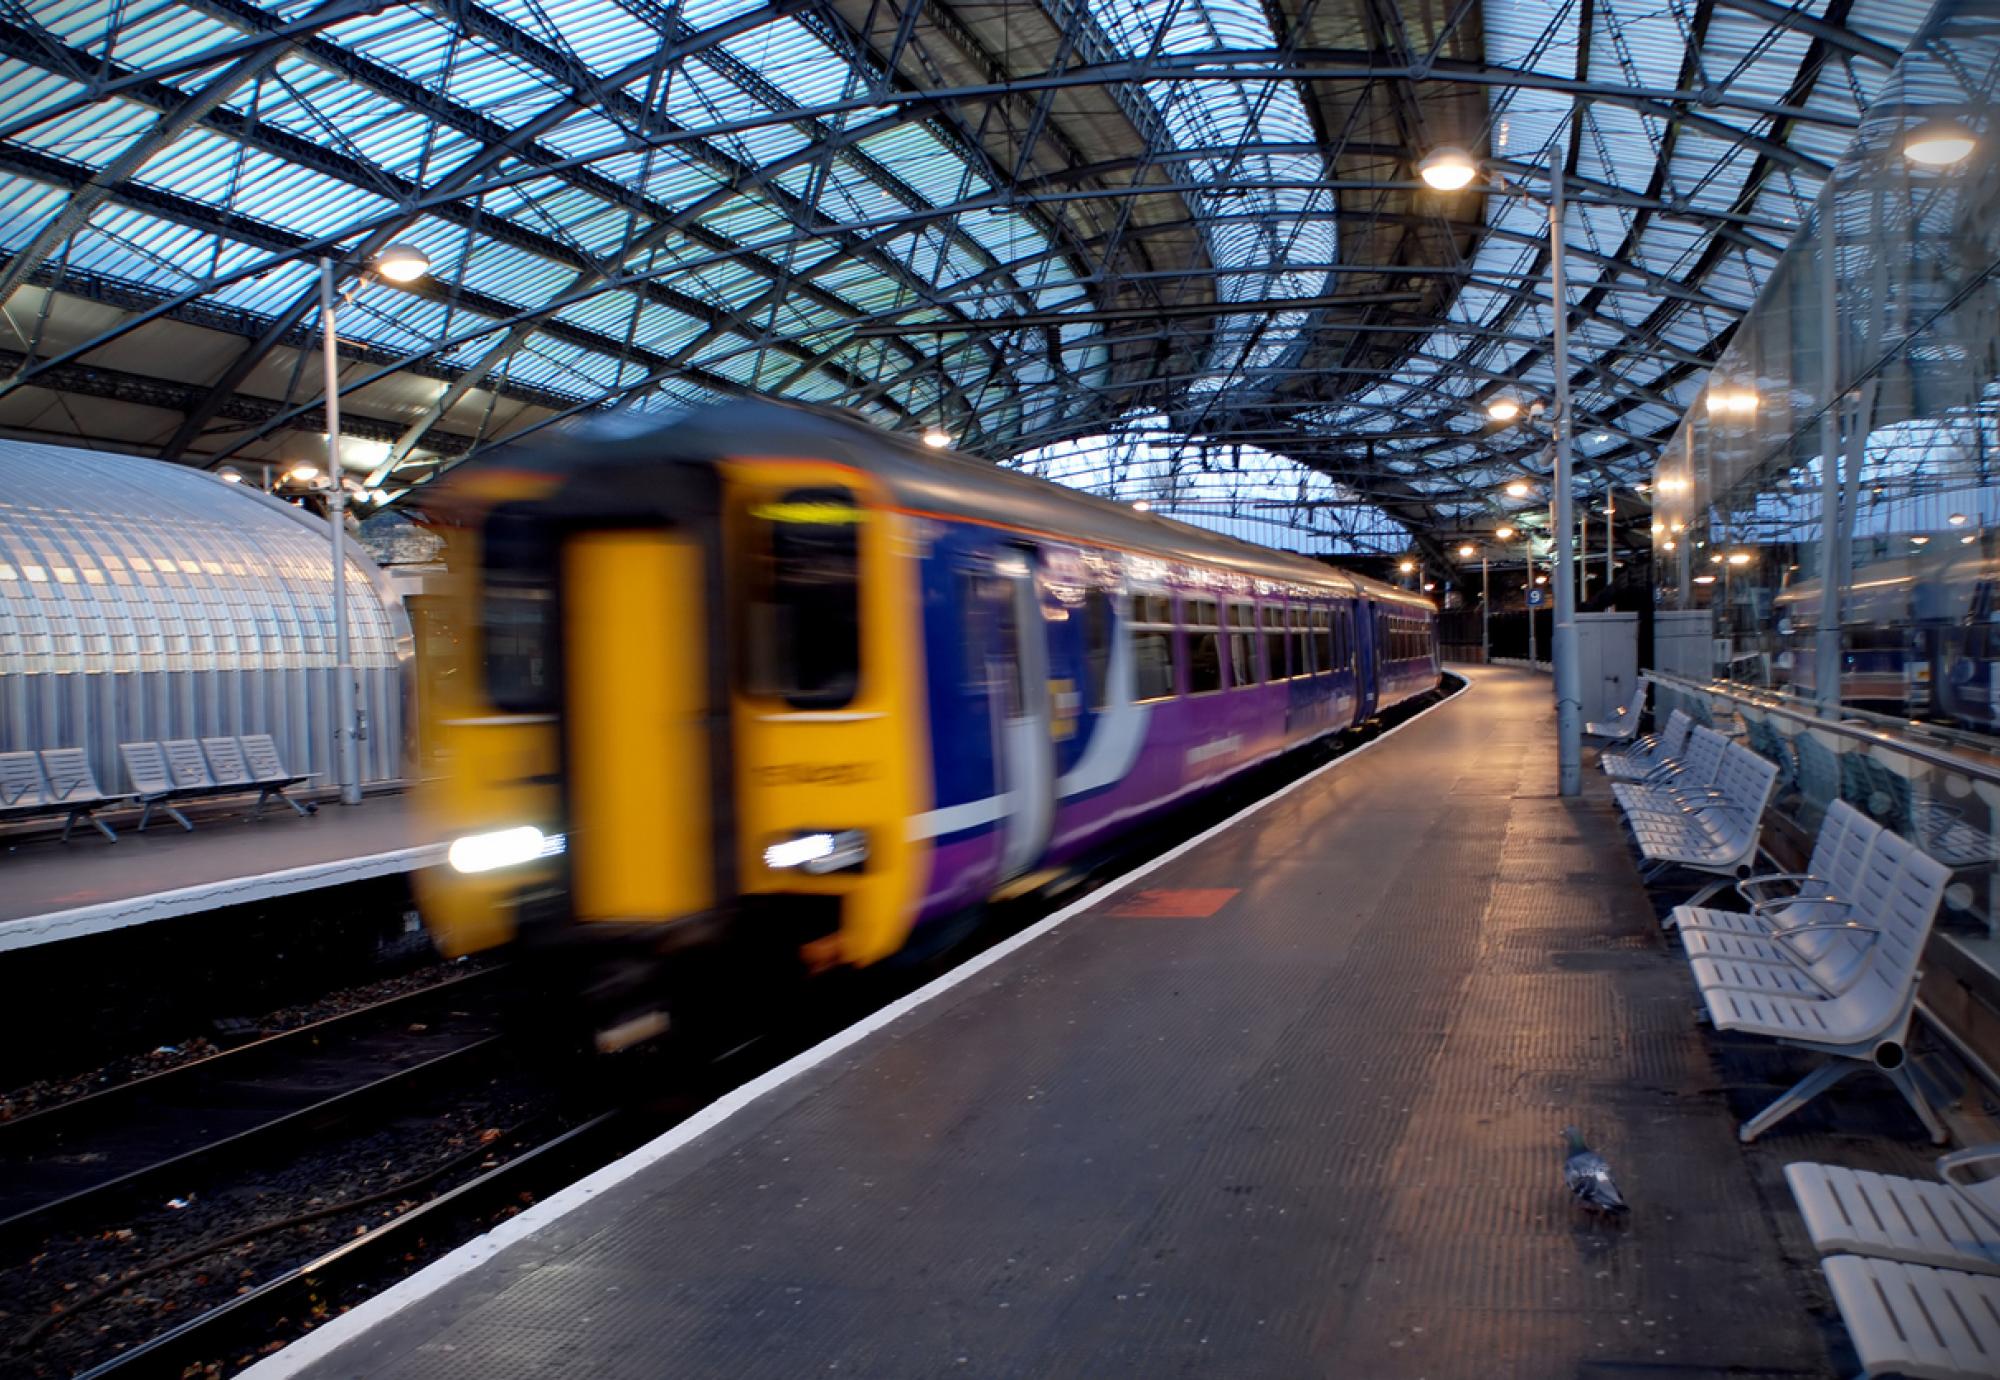 Northern train at Liverpool Lime Street station